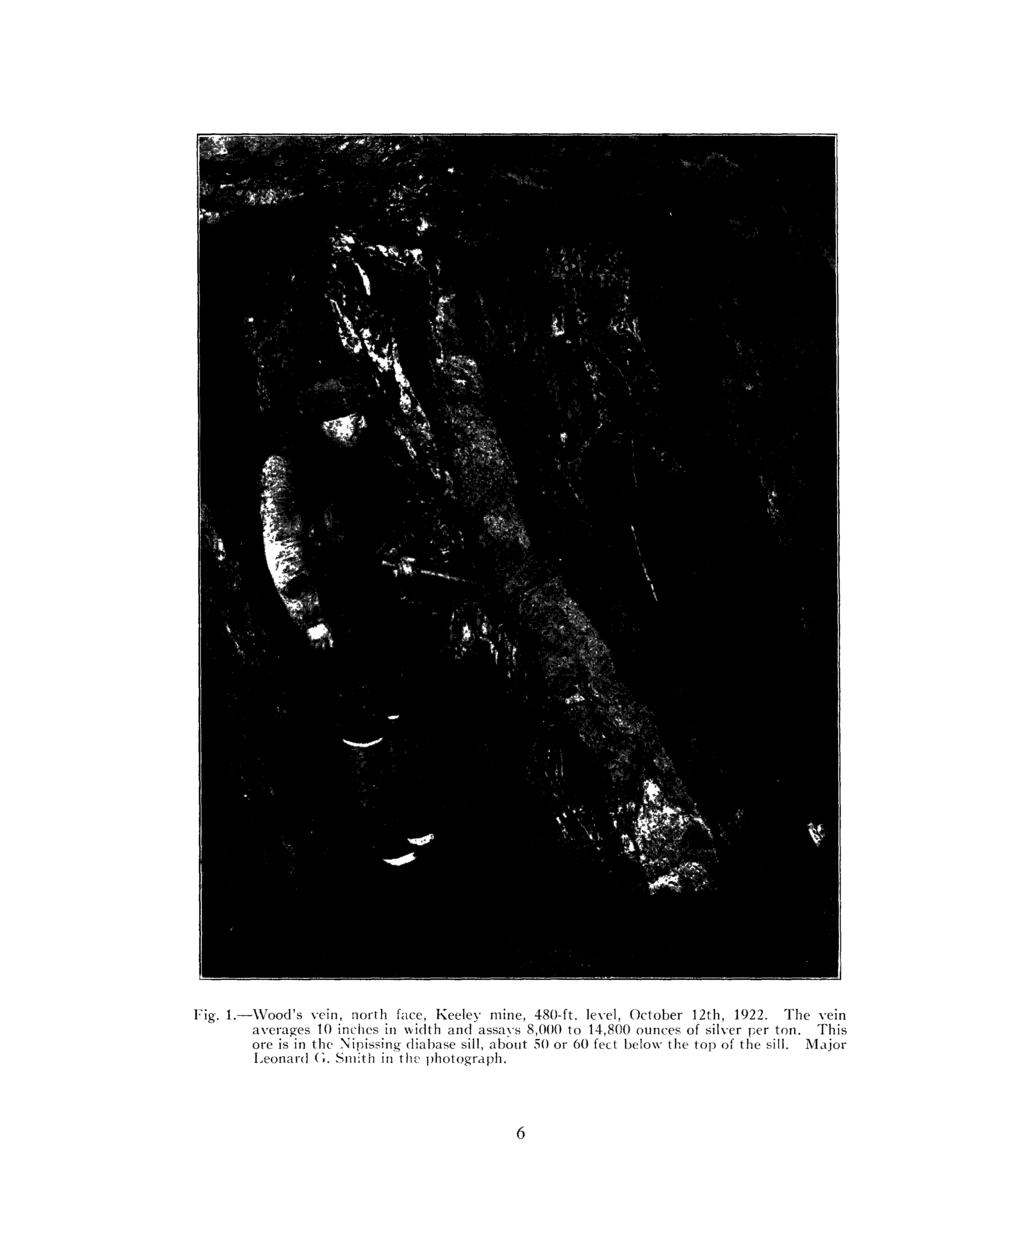 Fig. 1. Wood's vein, north face, Keeley mine, 480-ft. level, October 12th, 1922.